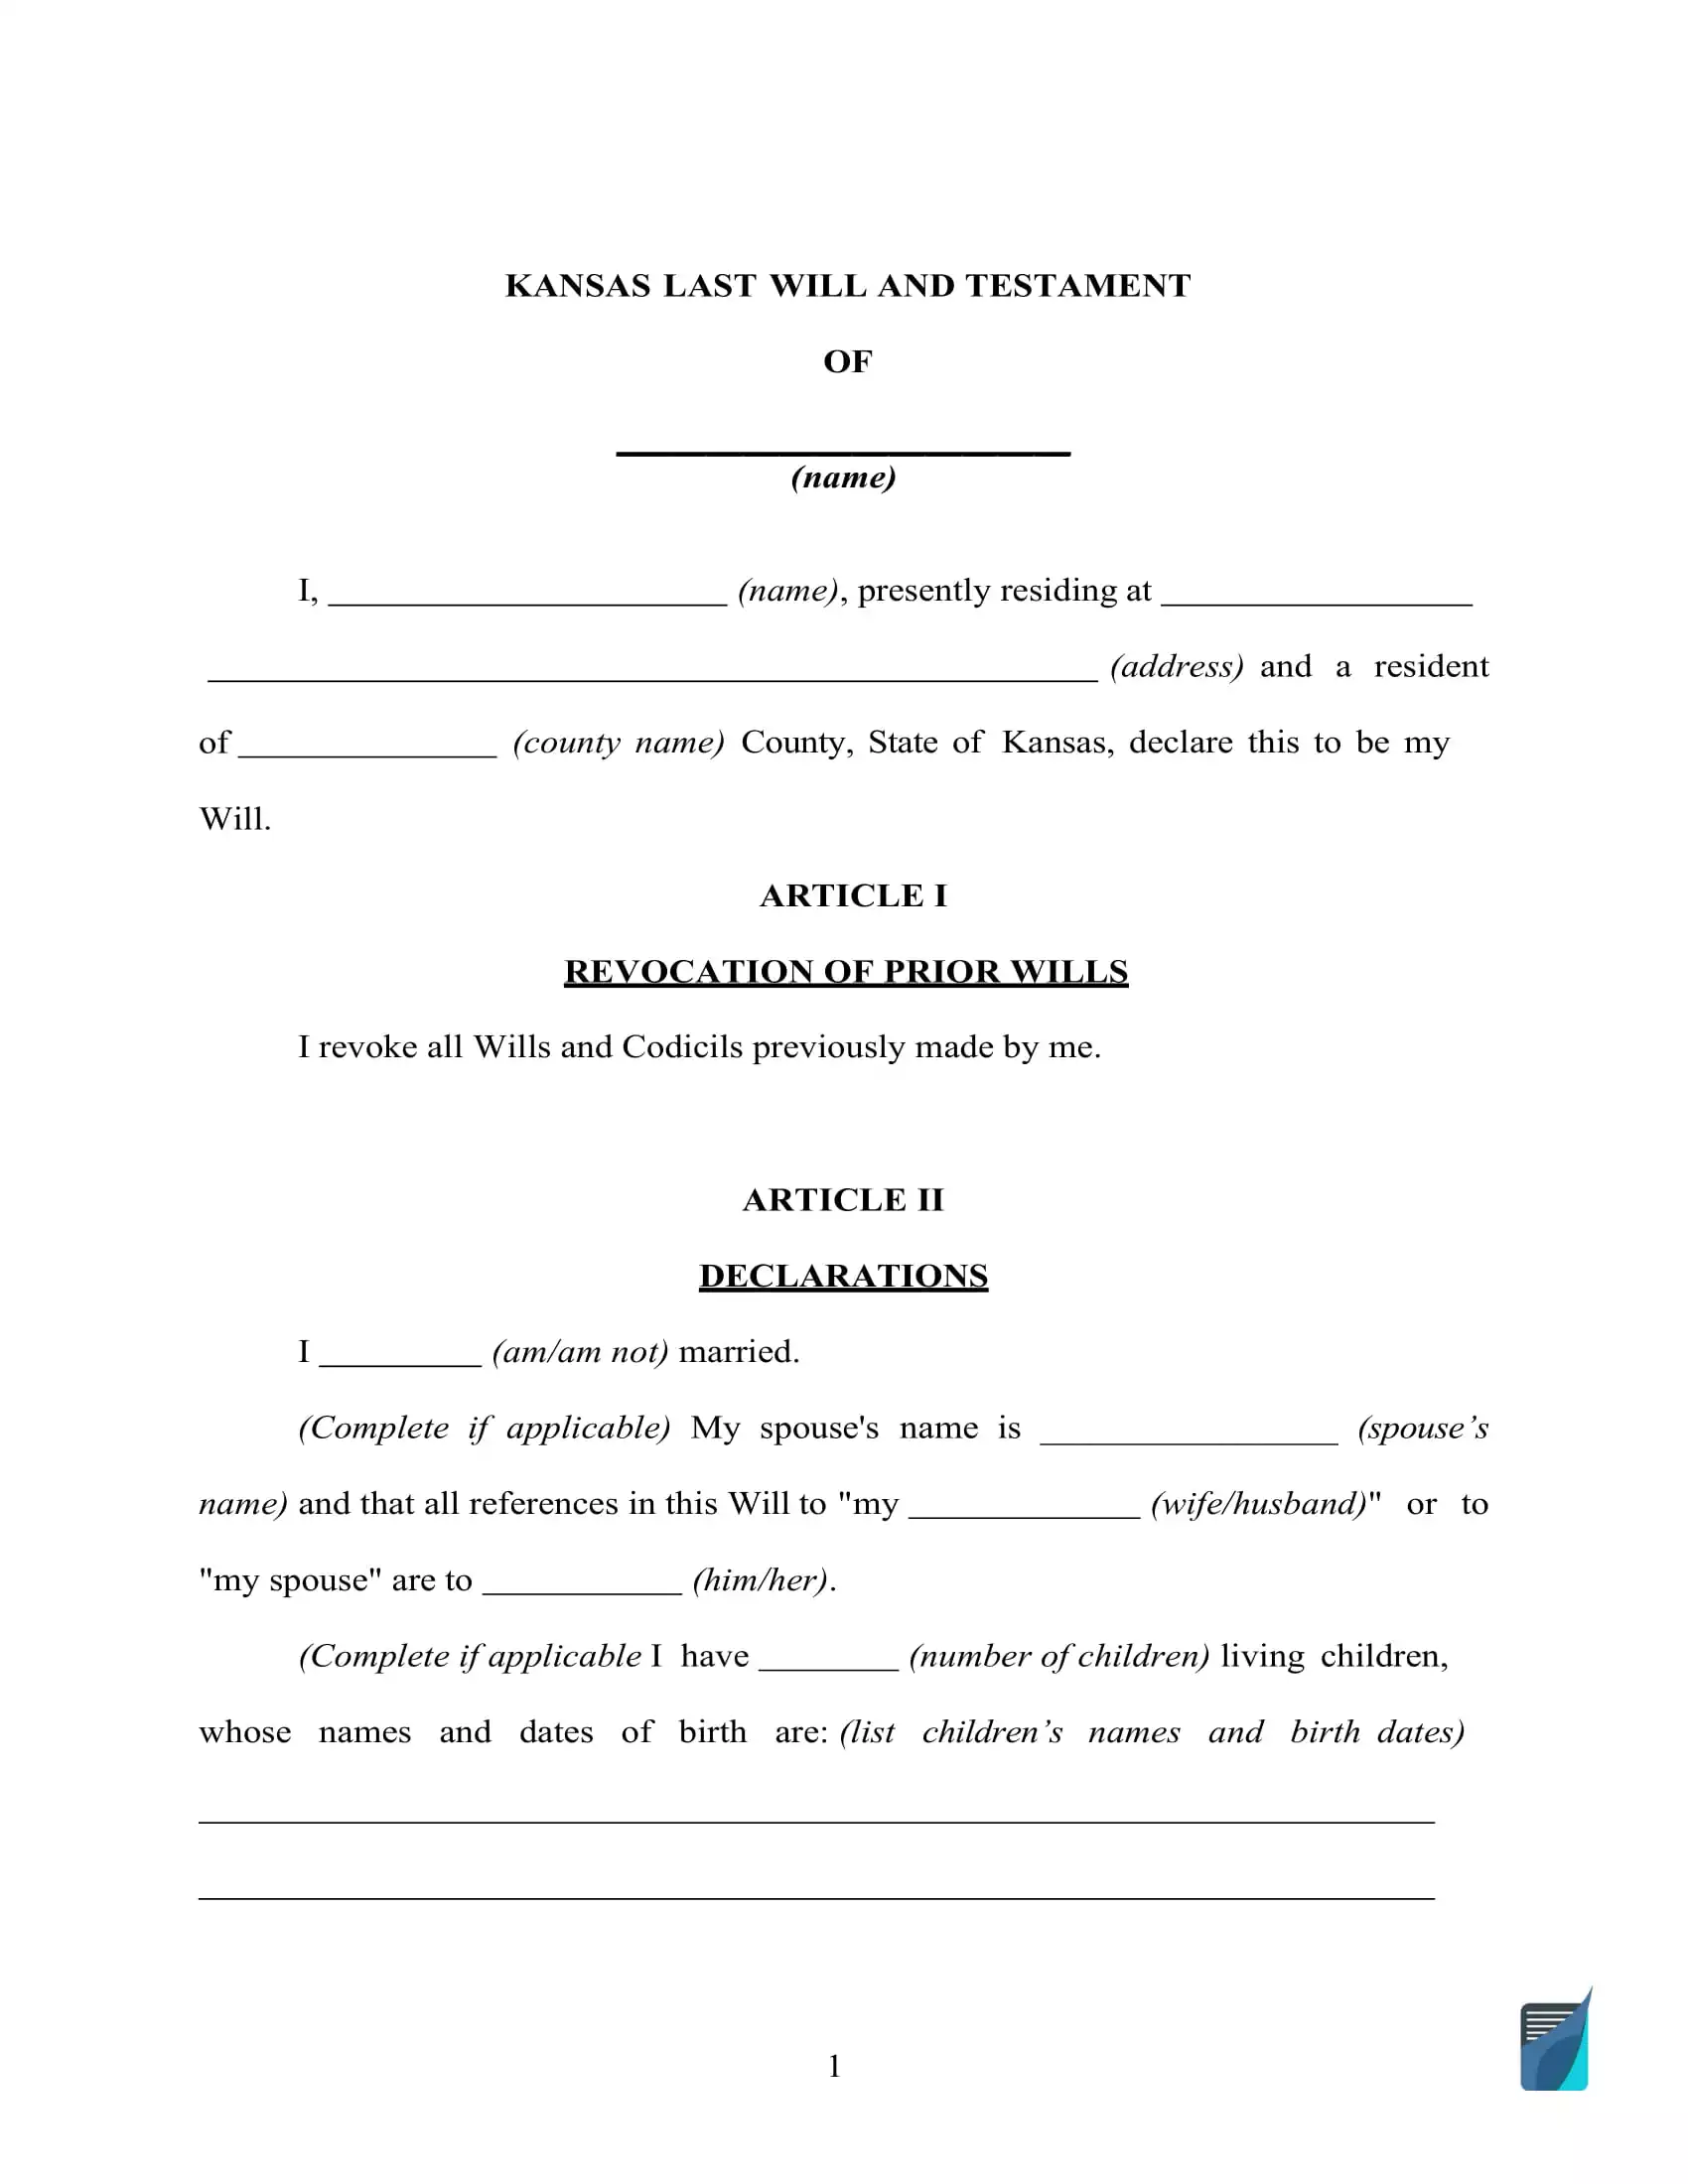 kansas-last-will-and-testament-template